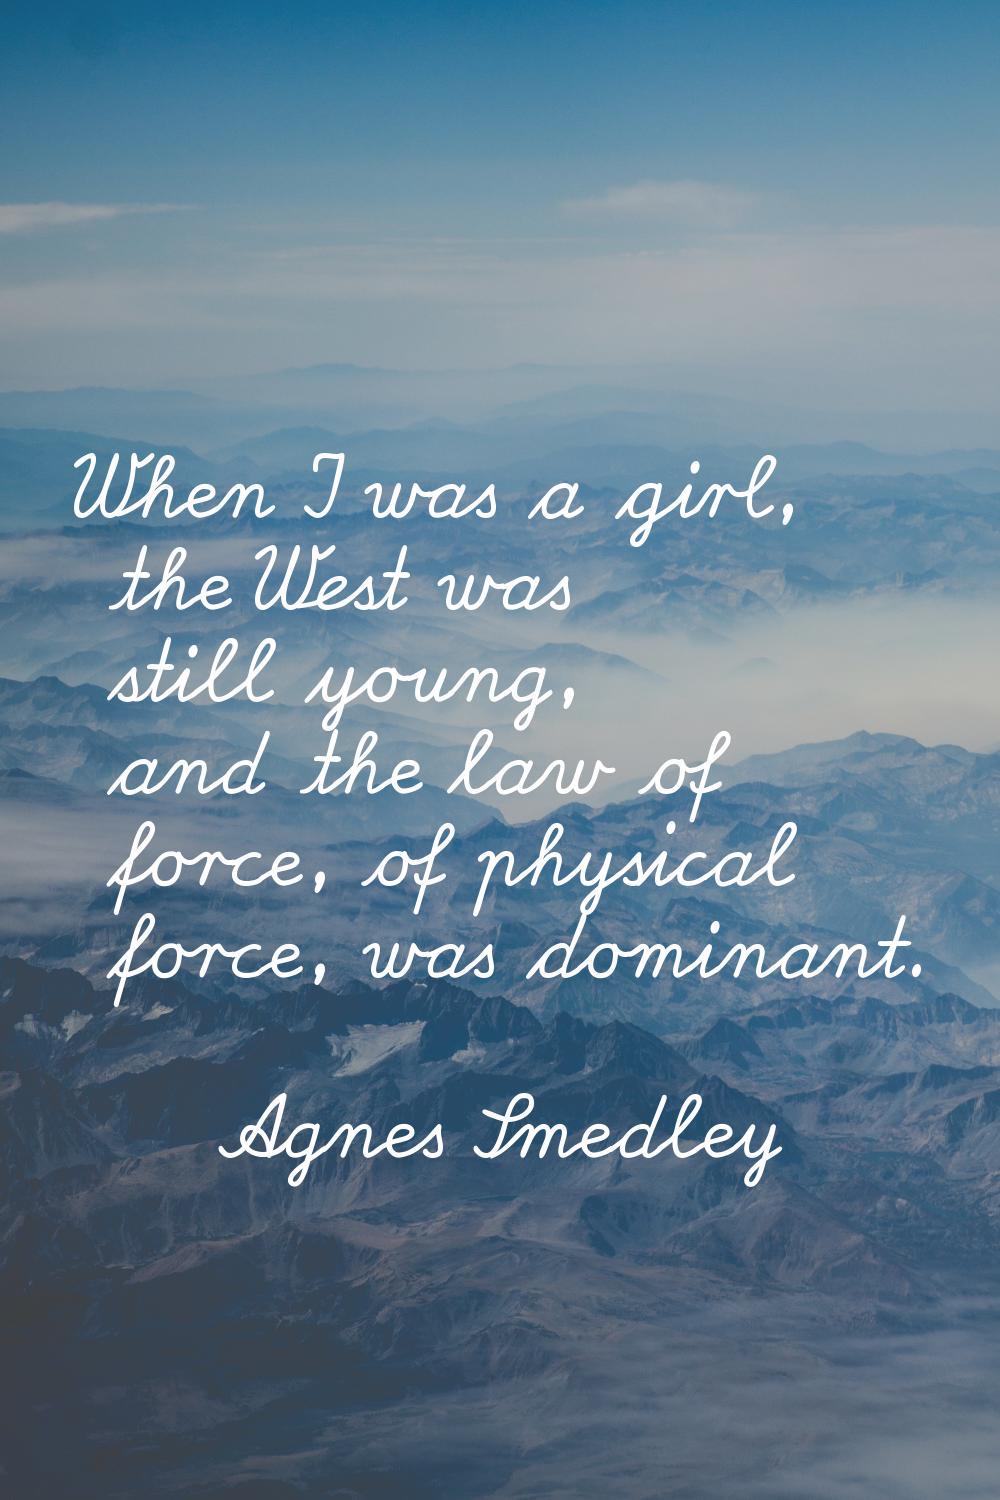 When I was a girl, the West was still young, and the law of force, of physical force, was dominant.